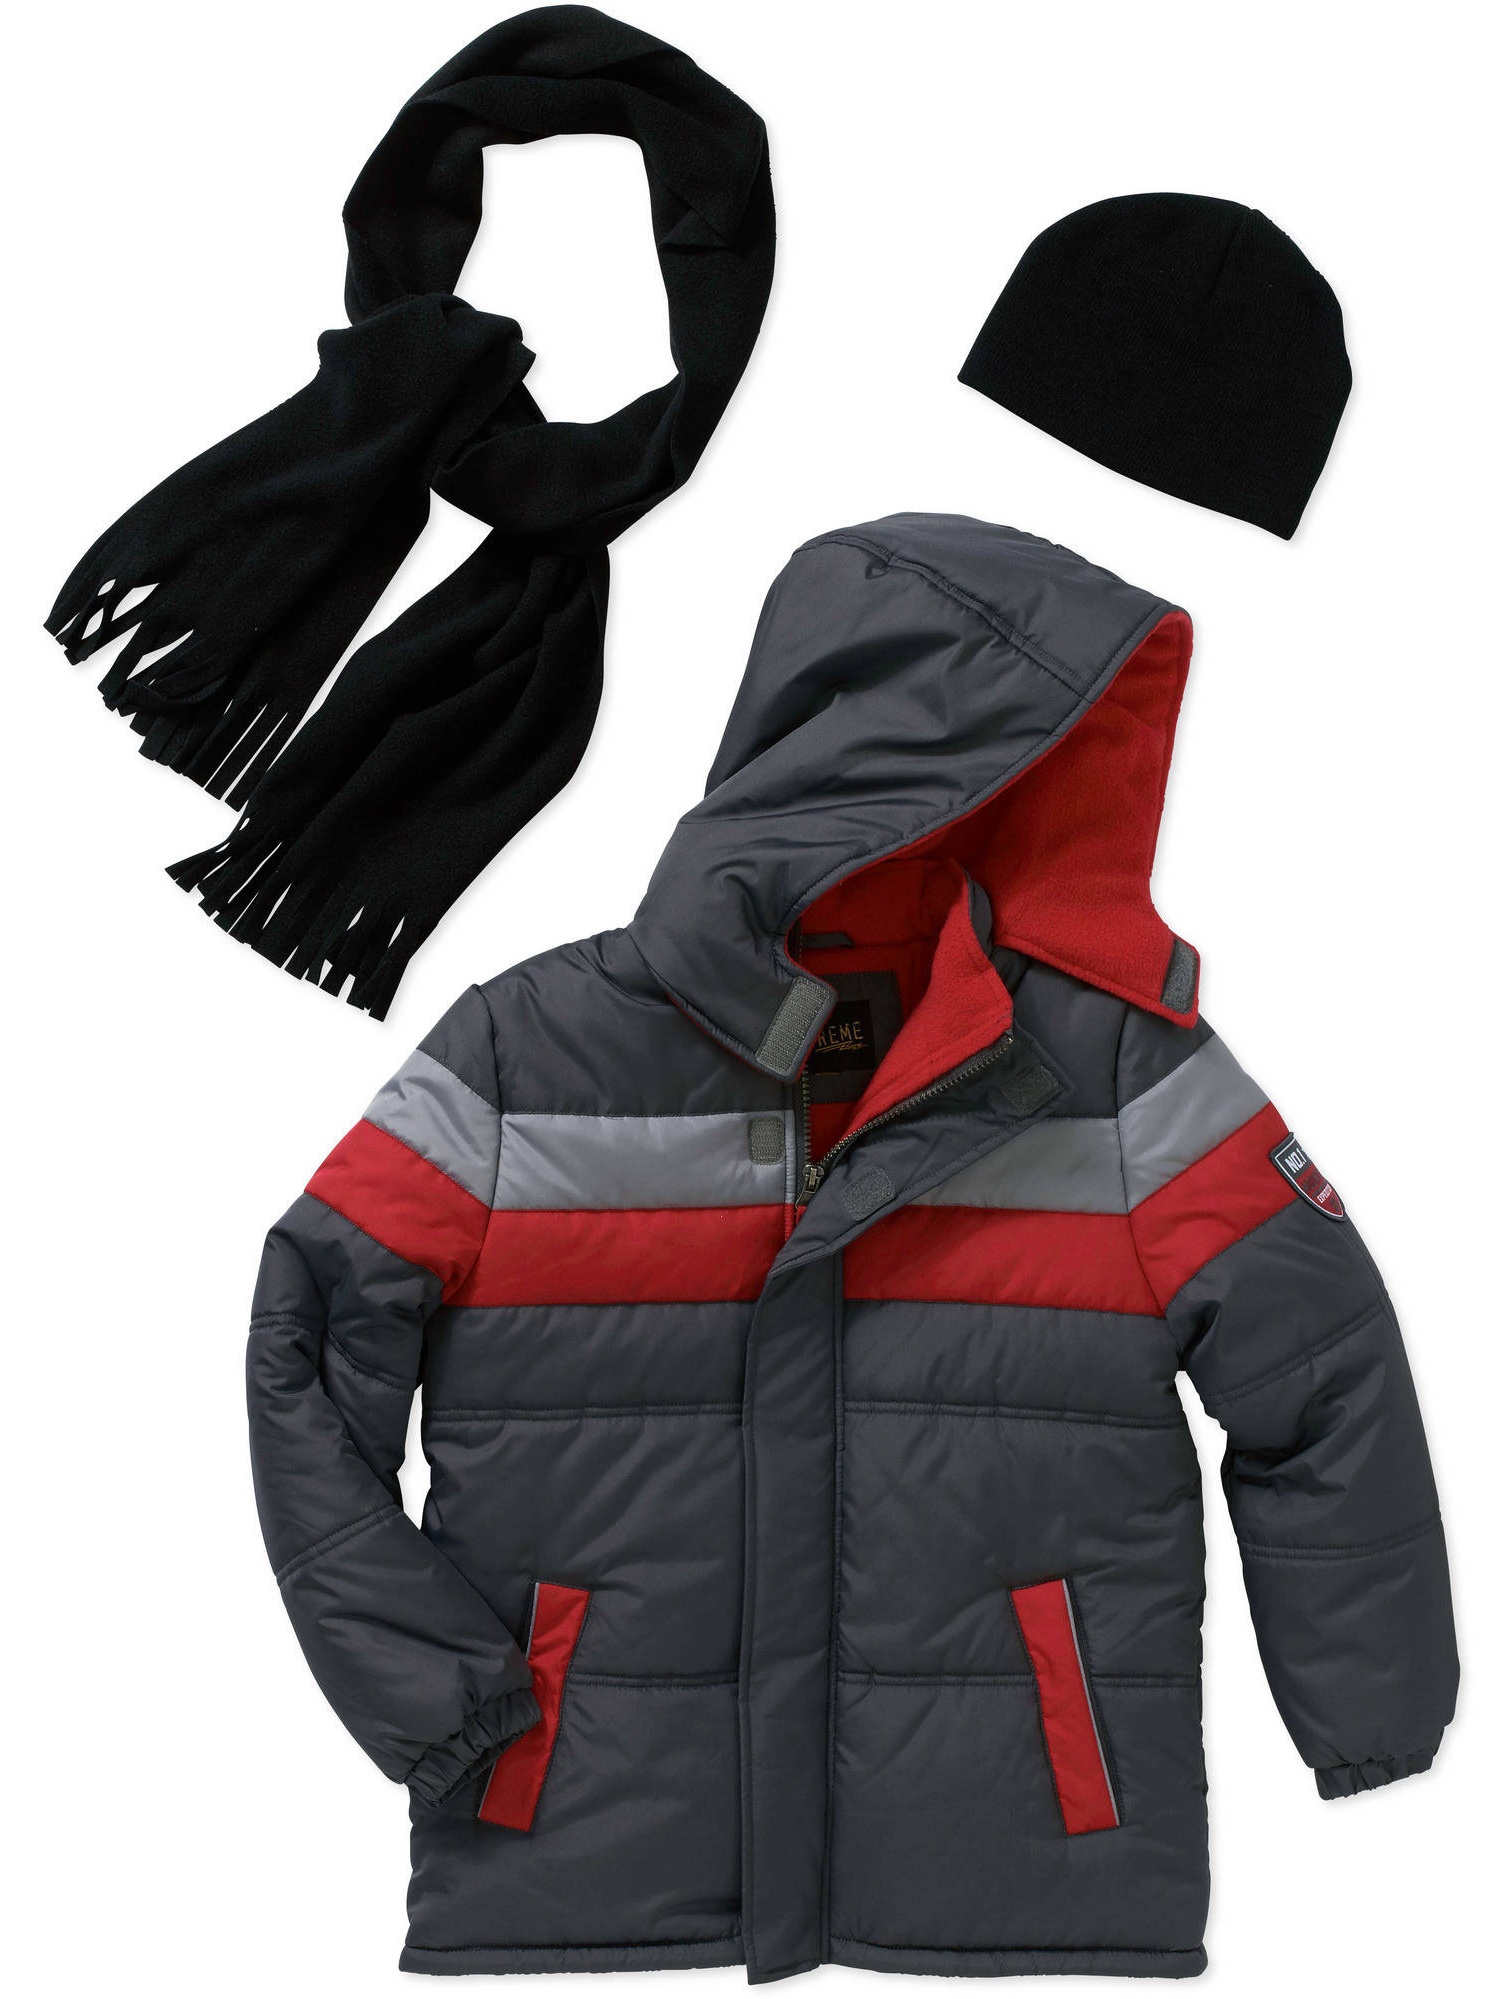 iXtreme Little Boys' "Howl Harp" Insulated Jacket with Beanie (Sizes 4 - 7) - charcoal gray, 4 - image 1 of 2